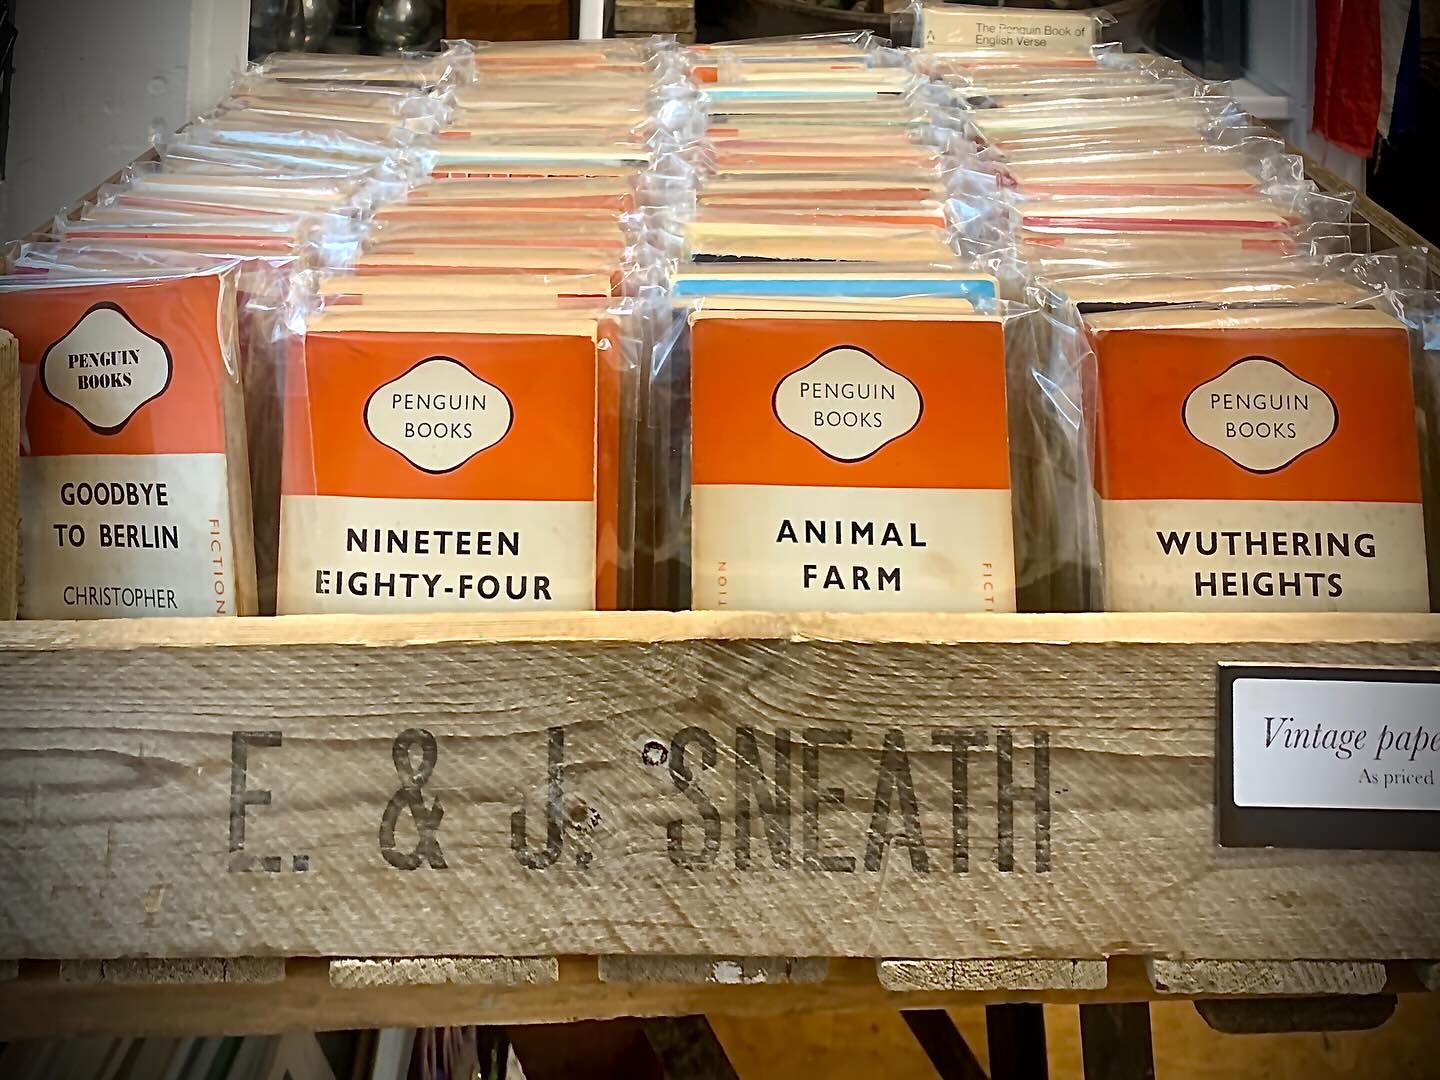 Penguin Classics, loads of first editions and classic titles. Available today @greenwichmarket. Buy them whilst I&rsquo;ve got them!!!
#greenwichmarketlondon 
#greenwichlondon 
#londonmarkets
#londonbookshops 
#greenwichmeridian 
#bookshops
#vintagep